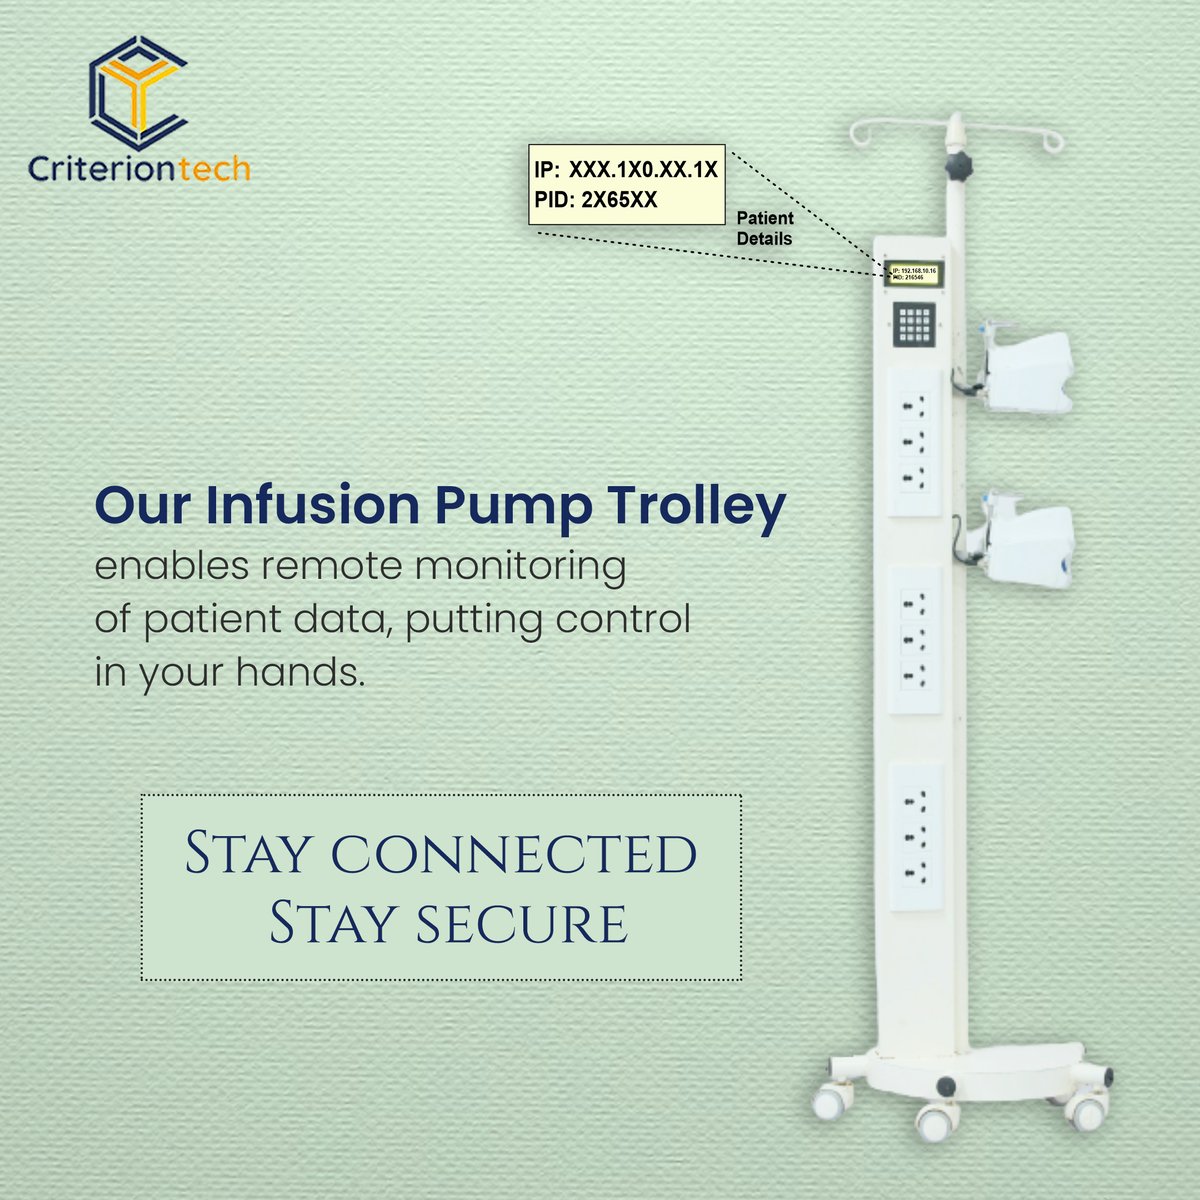 Patient safety at your fingertips

Learn more at: criteriontechnologies.com/infusion-pump-…
.
#PatientSafety #HealthcareTech #PatientSafety #RemoteMonitoring #HealthTech #MedicalEquipment #ConnectedCare #HealthcareInnovation #DigitalHealth #Criteria4Technology #CriterionTech